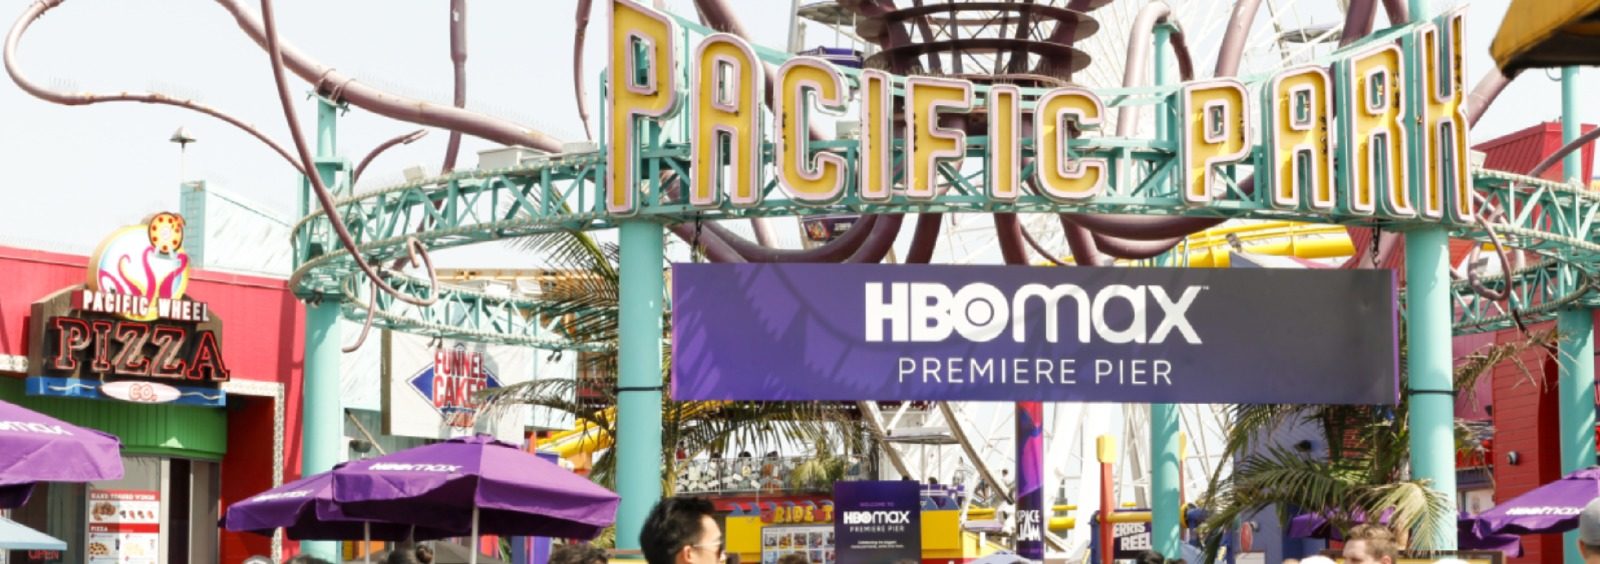 HBO Max Premiere Pier takeover entrance